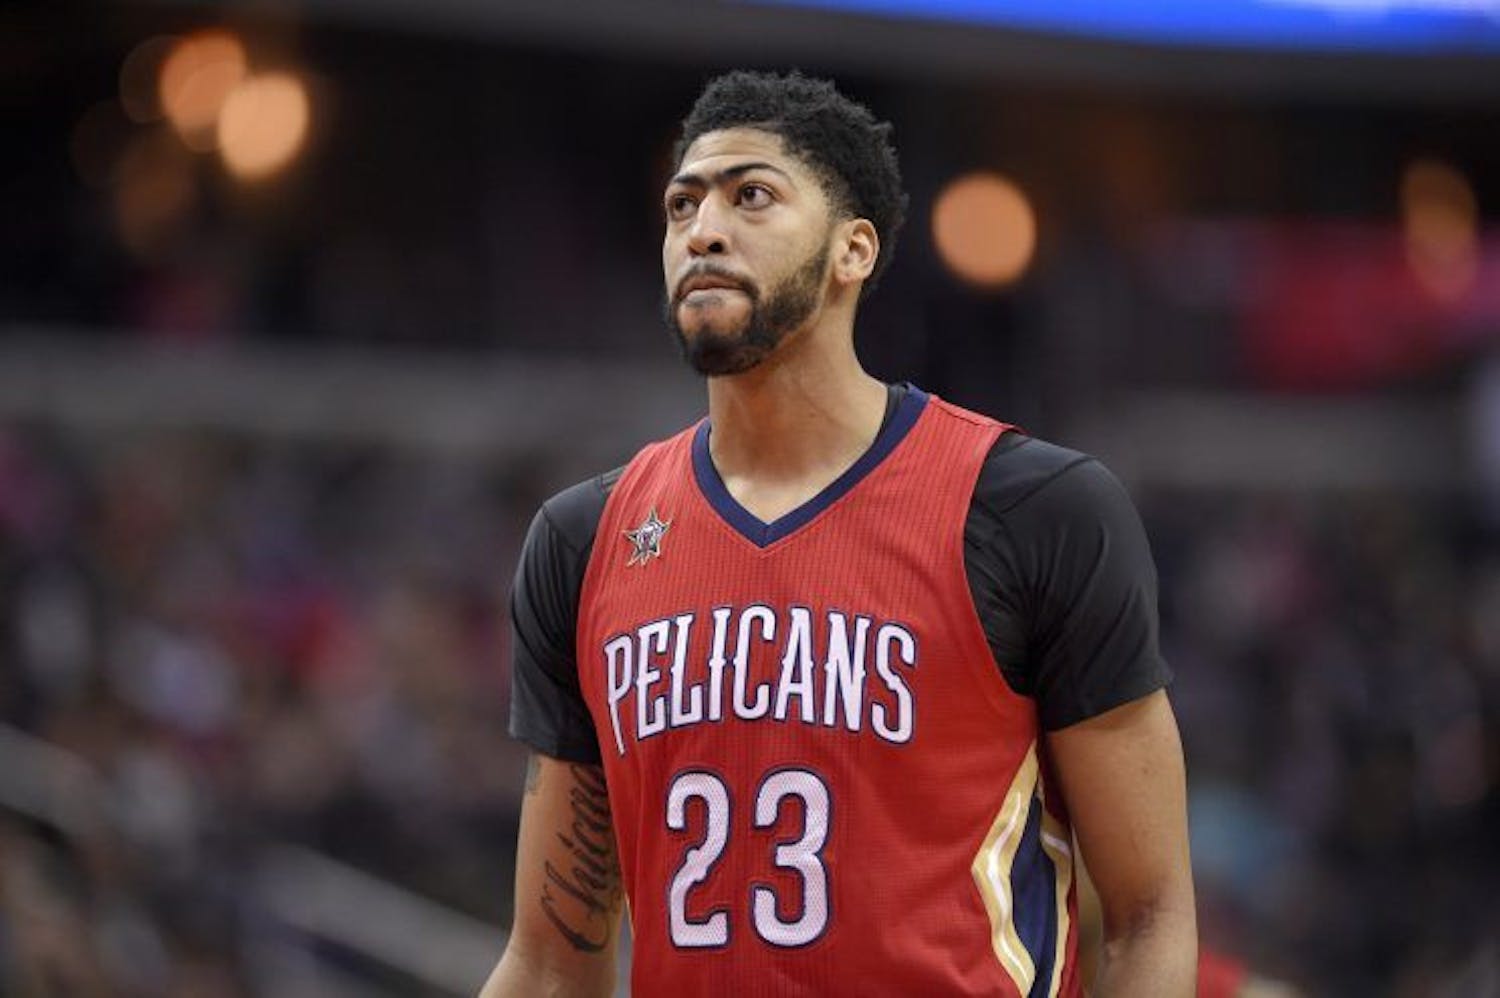 Pelicans F/C Anthony Davis was nearly the only unanimous pick by the alligatorSports NBA Awards Selection Panel. He's predicted to be the NBA Defensive Player of the Year by three-fourths of the panel.